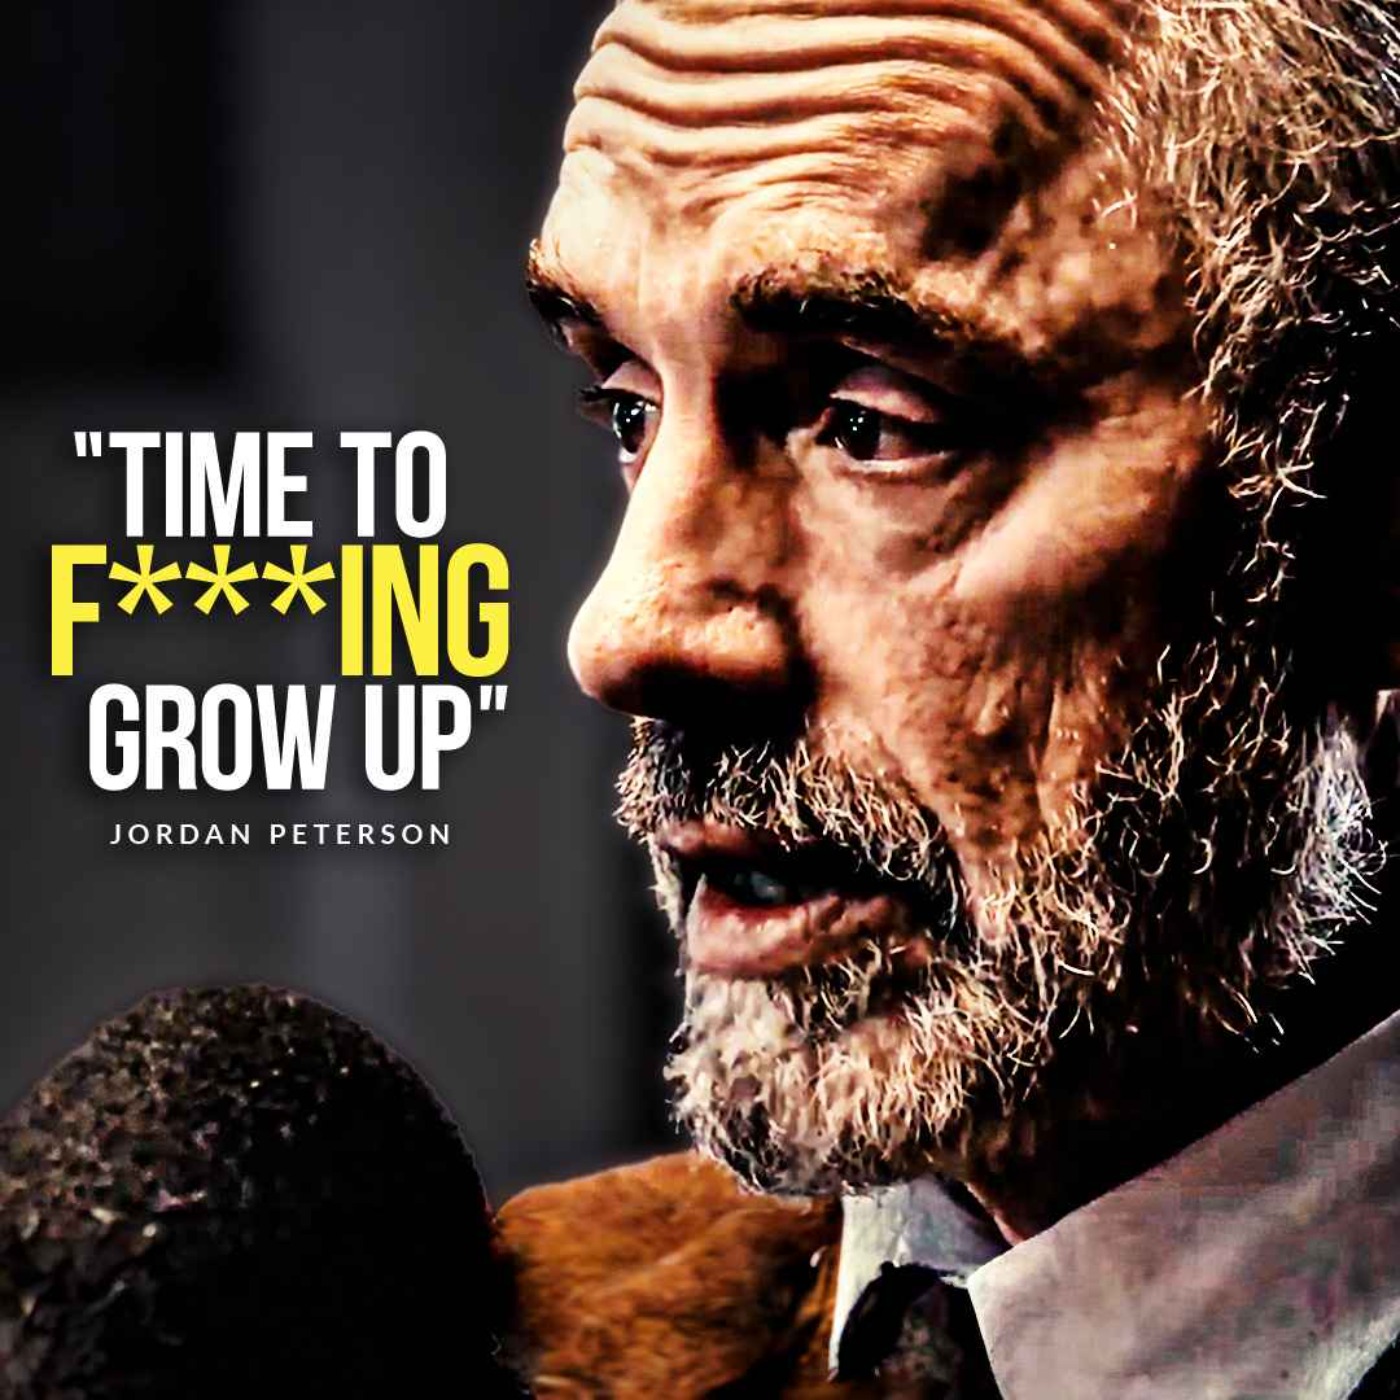 TIME TO GROW UP | Jordan Peterson's Life Advice Will Change Your Future (MUST LISTEN)